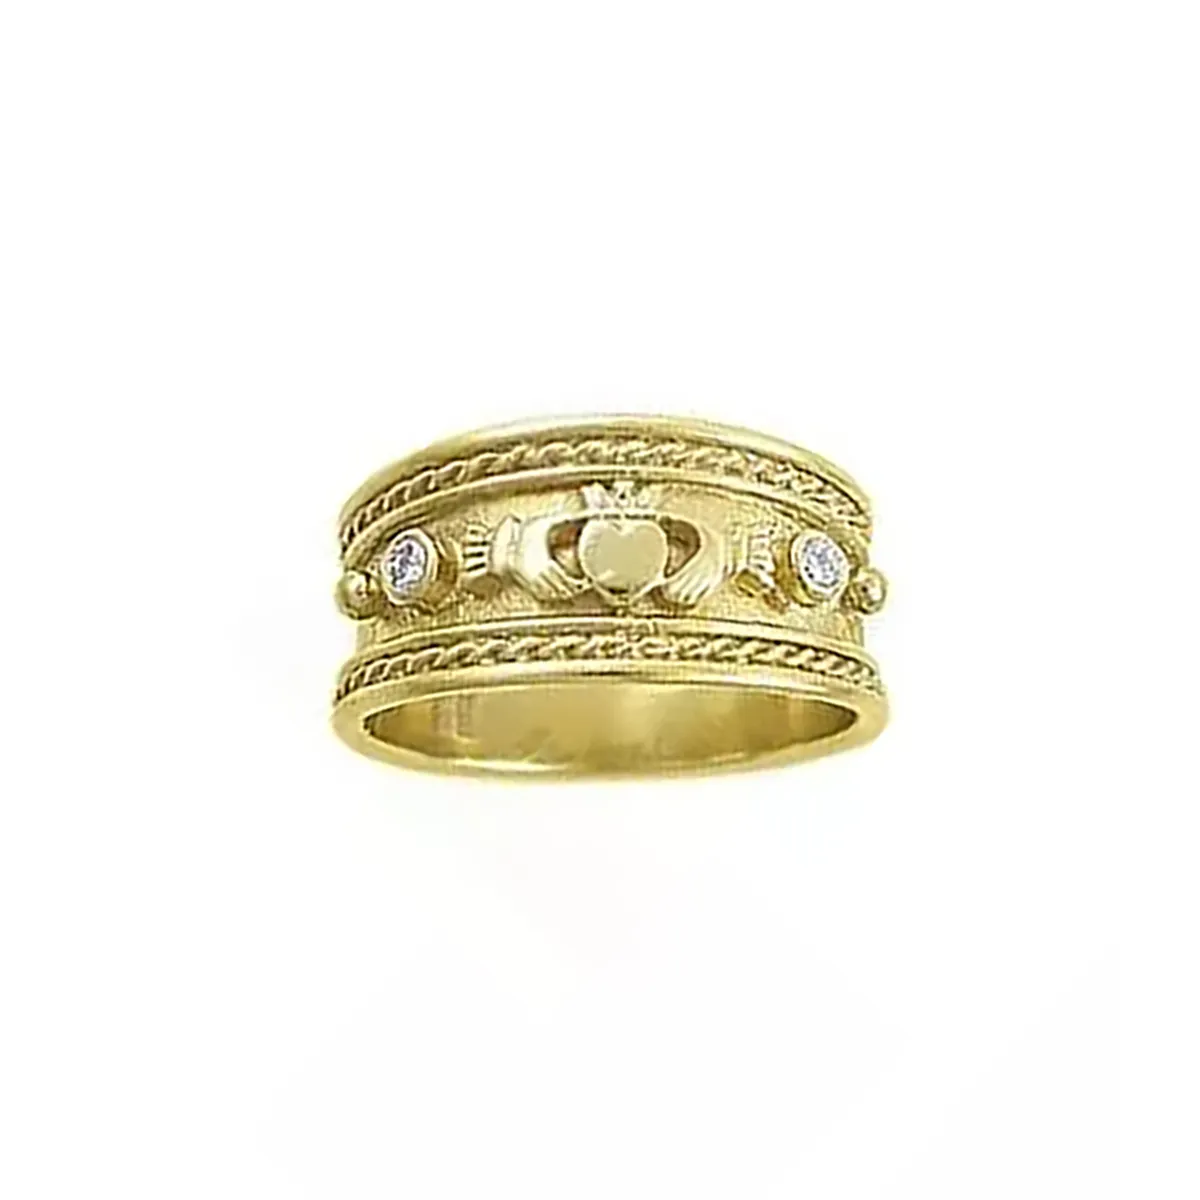 Enchanting Wide Irish Claddagh Ring In Gold Set With Diamonds...